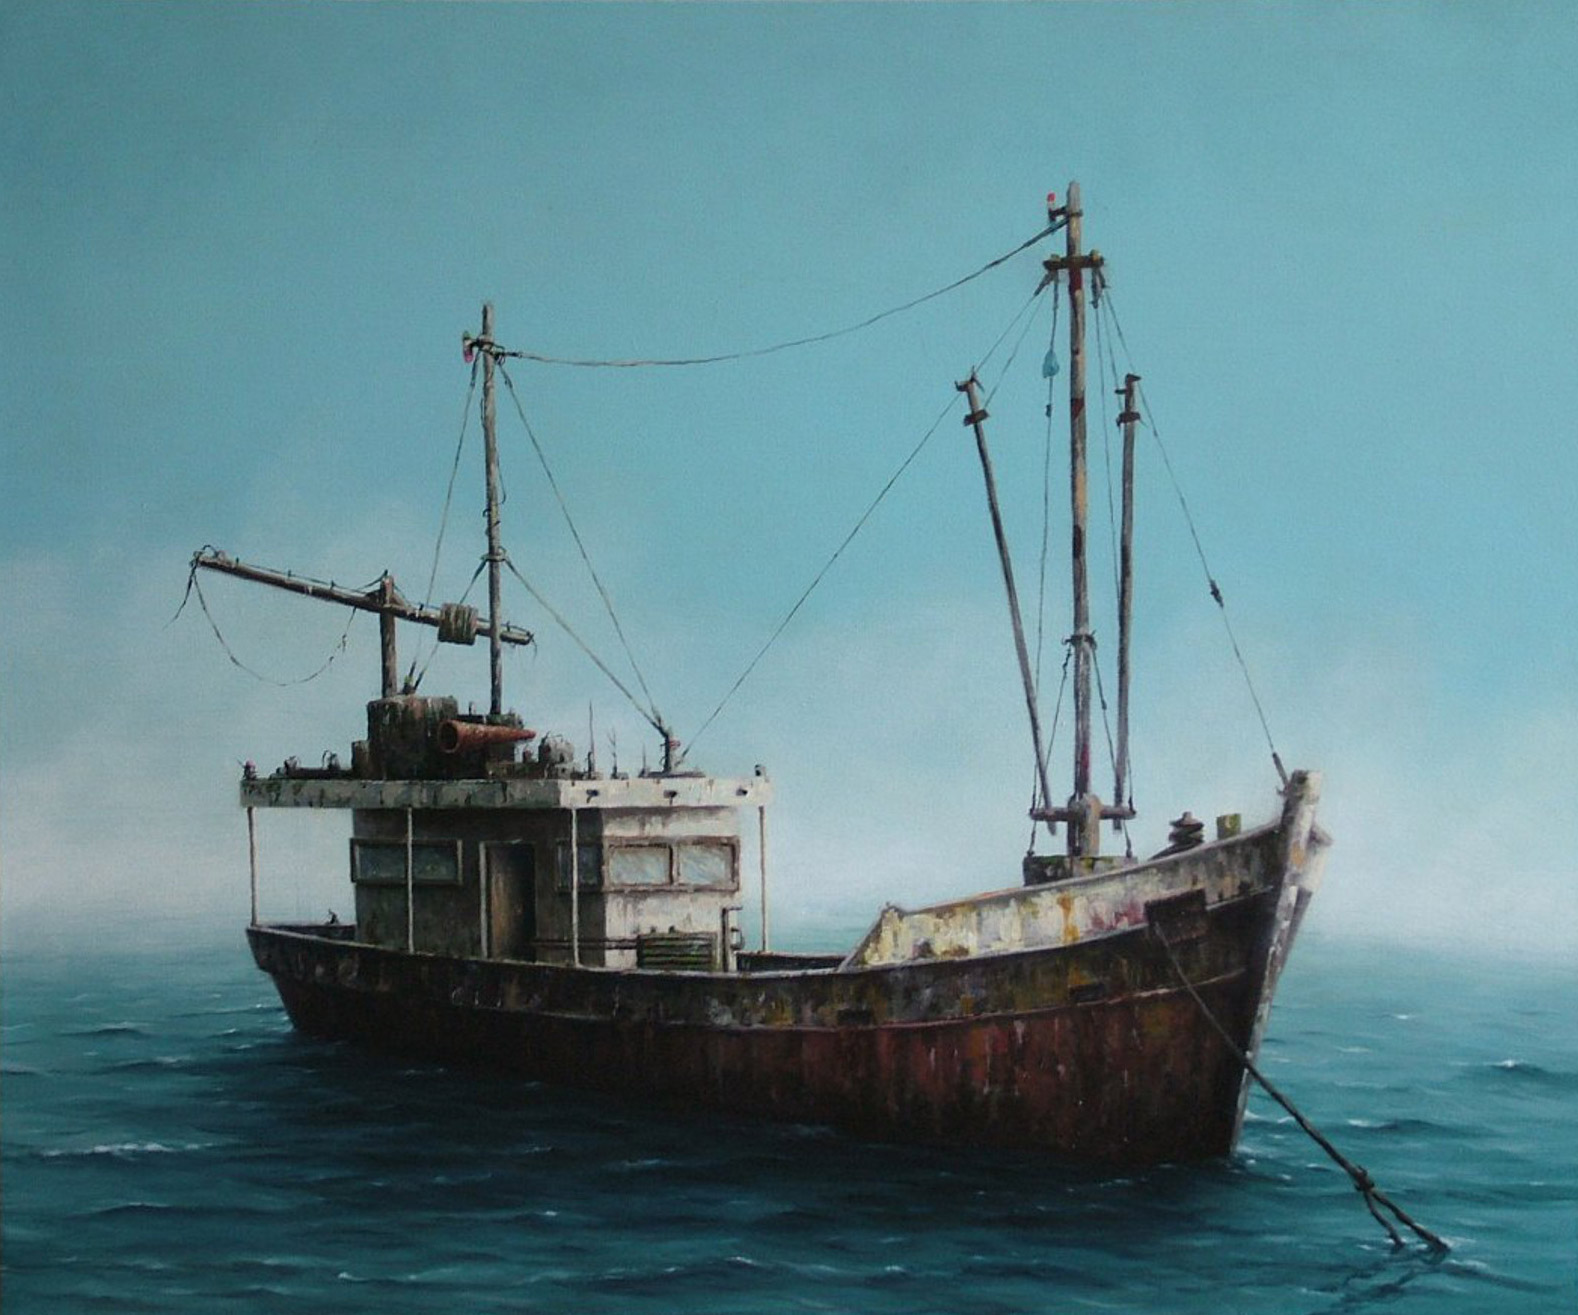 Boat 2 2013  Oil on canvas  100 x 80cm